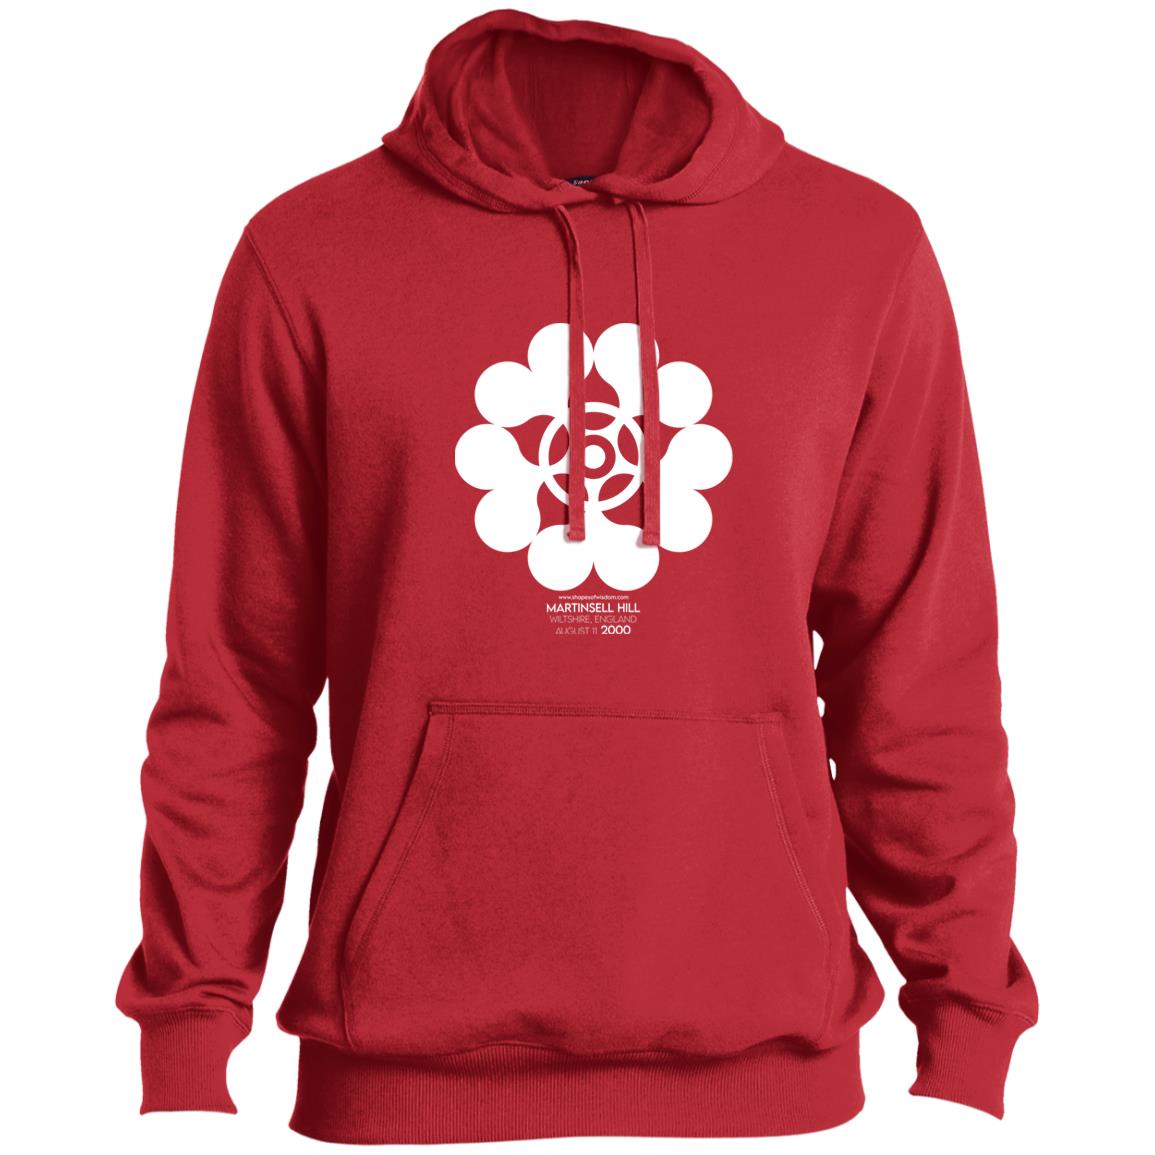 Crop Circle Pullover Hoodie - Martinsell Hill 2